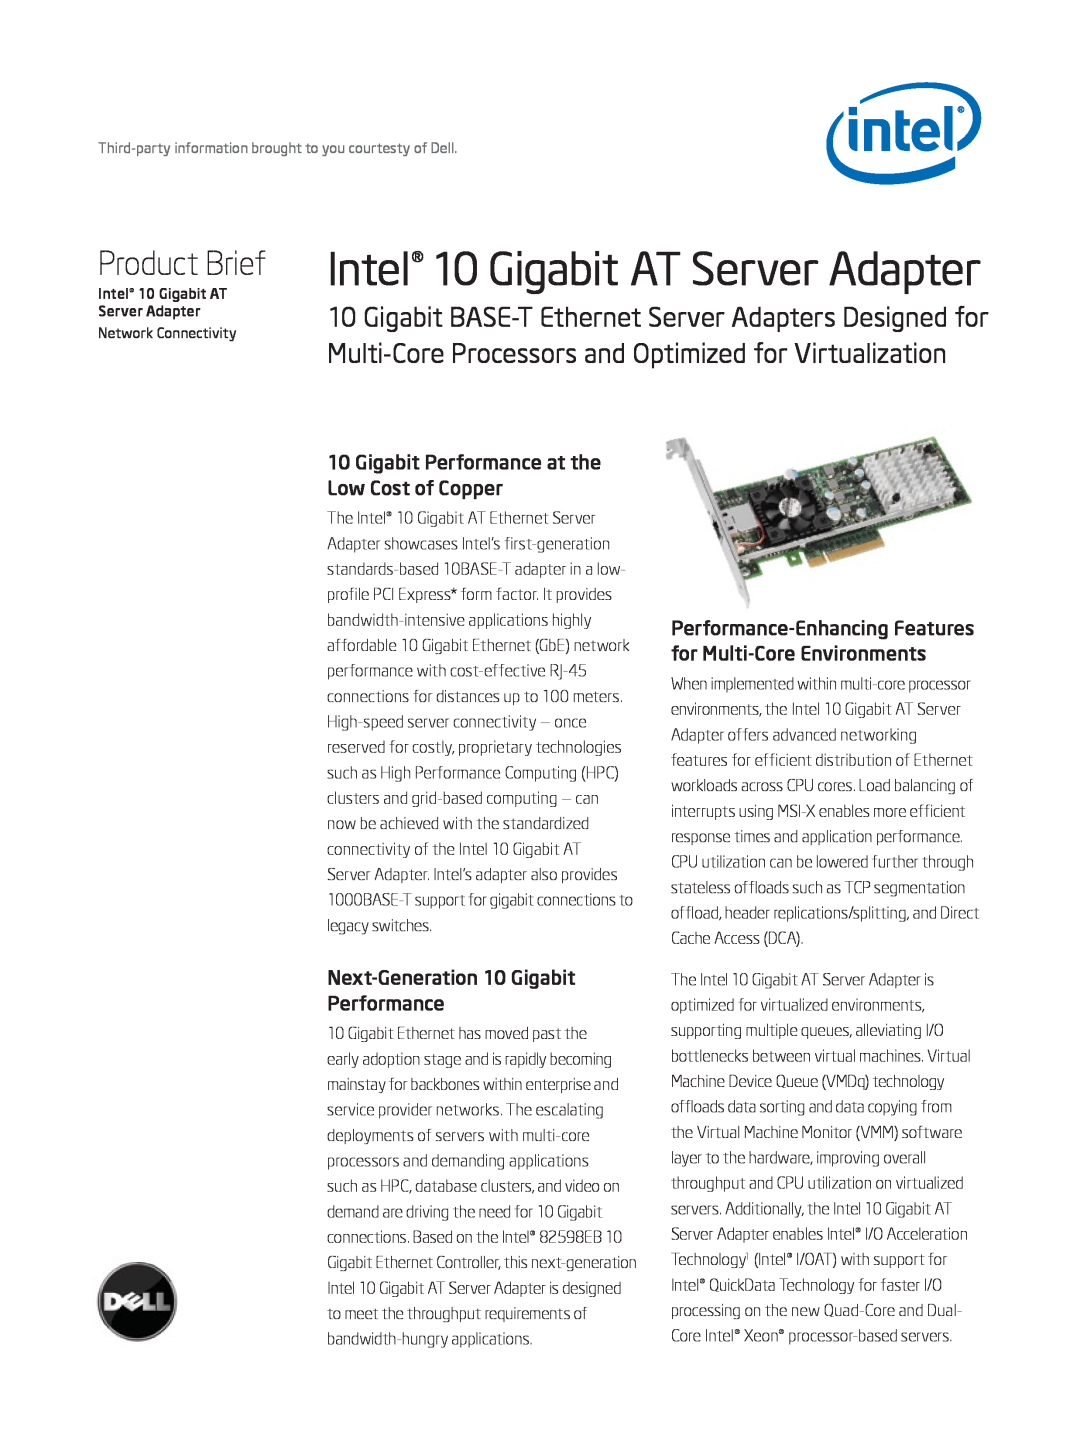 Intel 10 Gigabit AT Ethernet Server Adapter manual Gigabit Performance at the Low Cost of Copper, Product Brief 